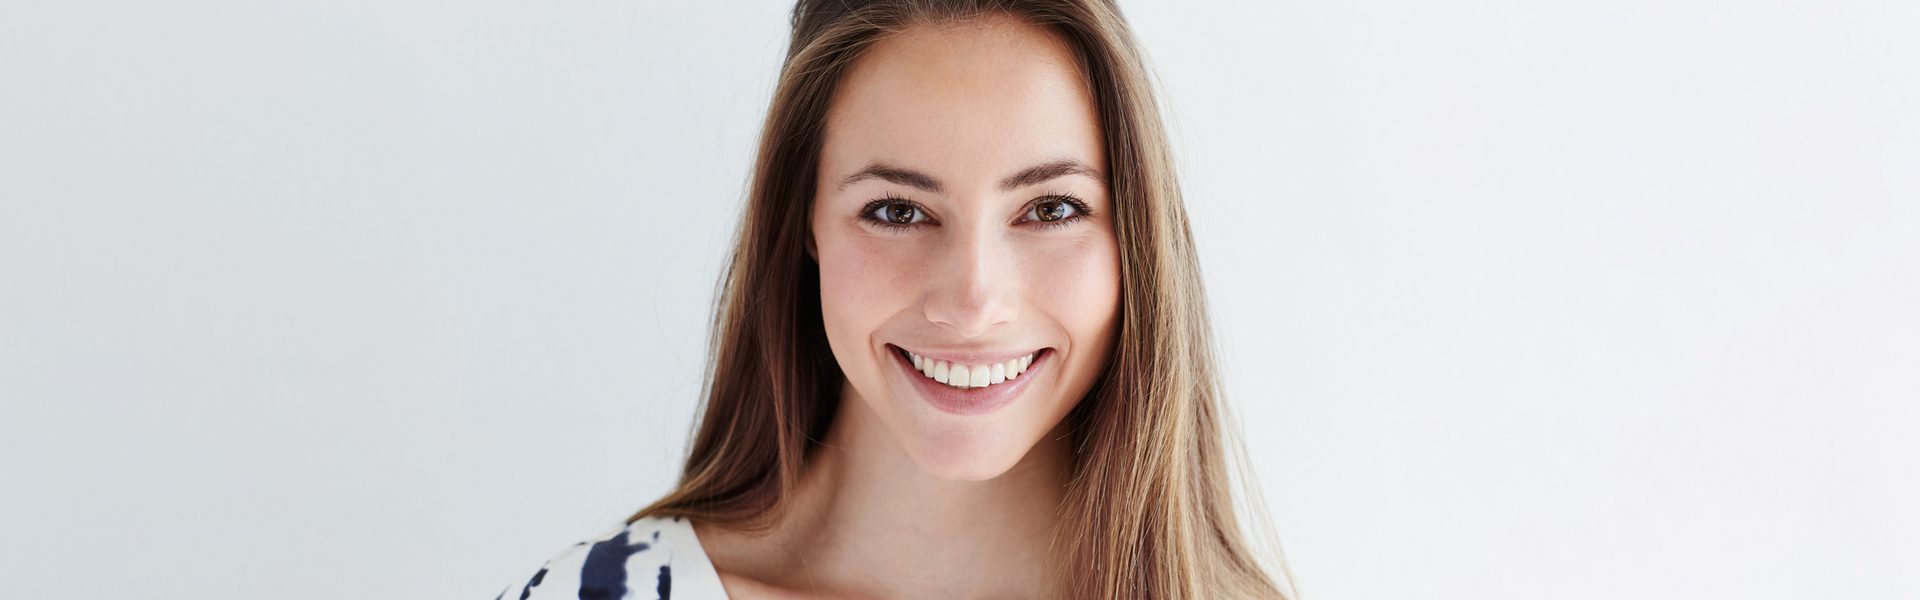 You’ll Love Straightening Your Teeth With Clear Aligners